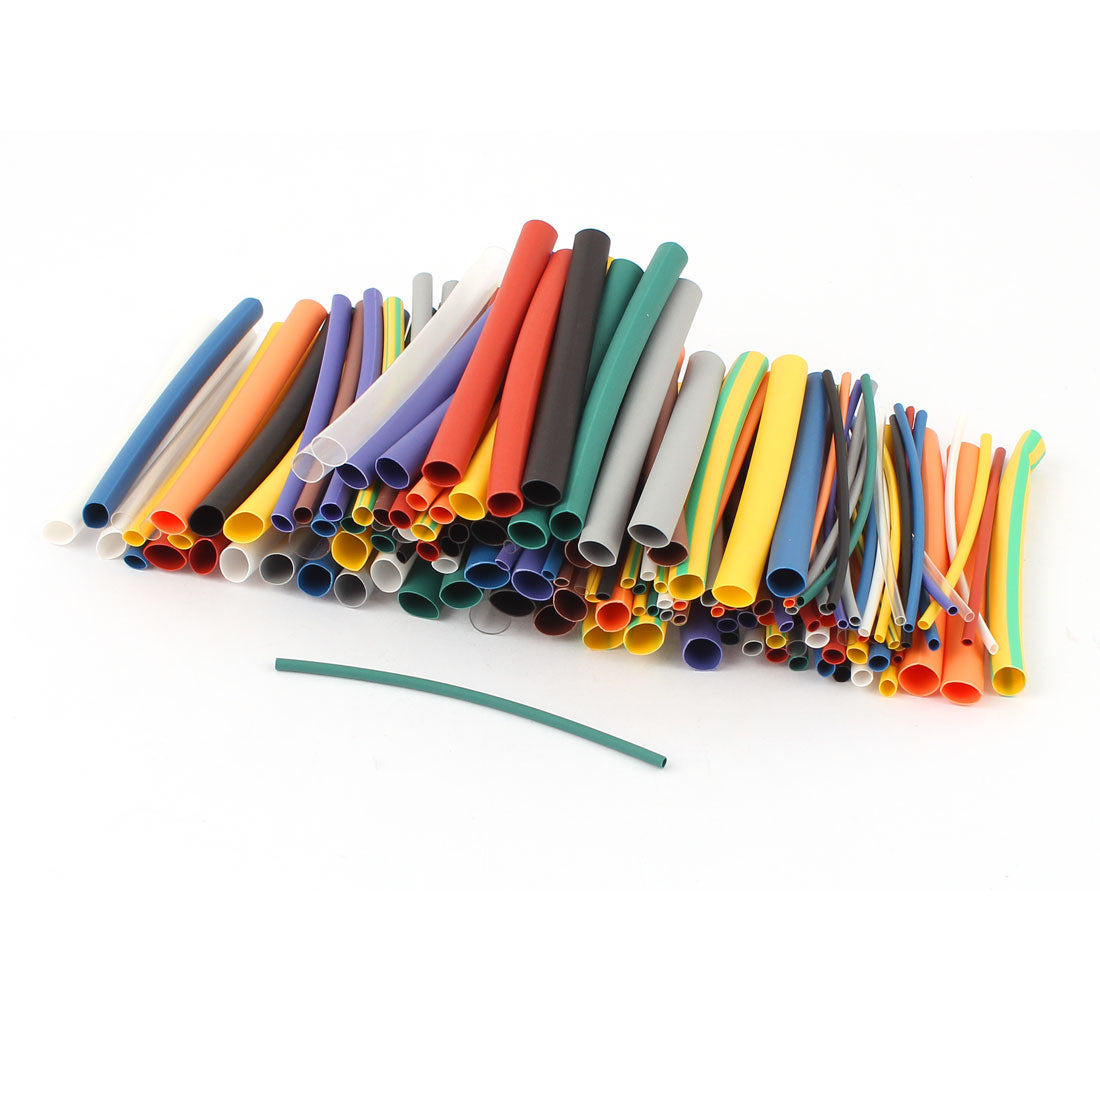 uxcell Uxcell 144Pcs 2:1 Heat Shrink Wire Wrap Assortment Kit Tubing Cable Sleeve Tube 6 Sizes